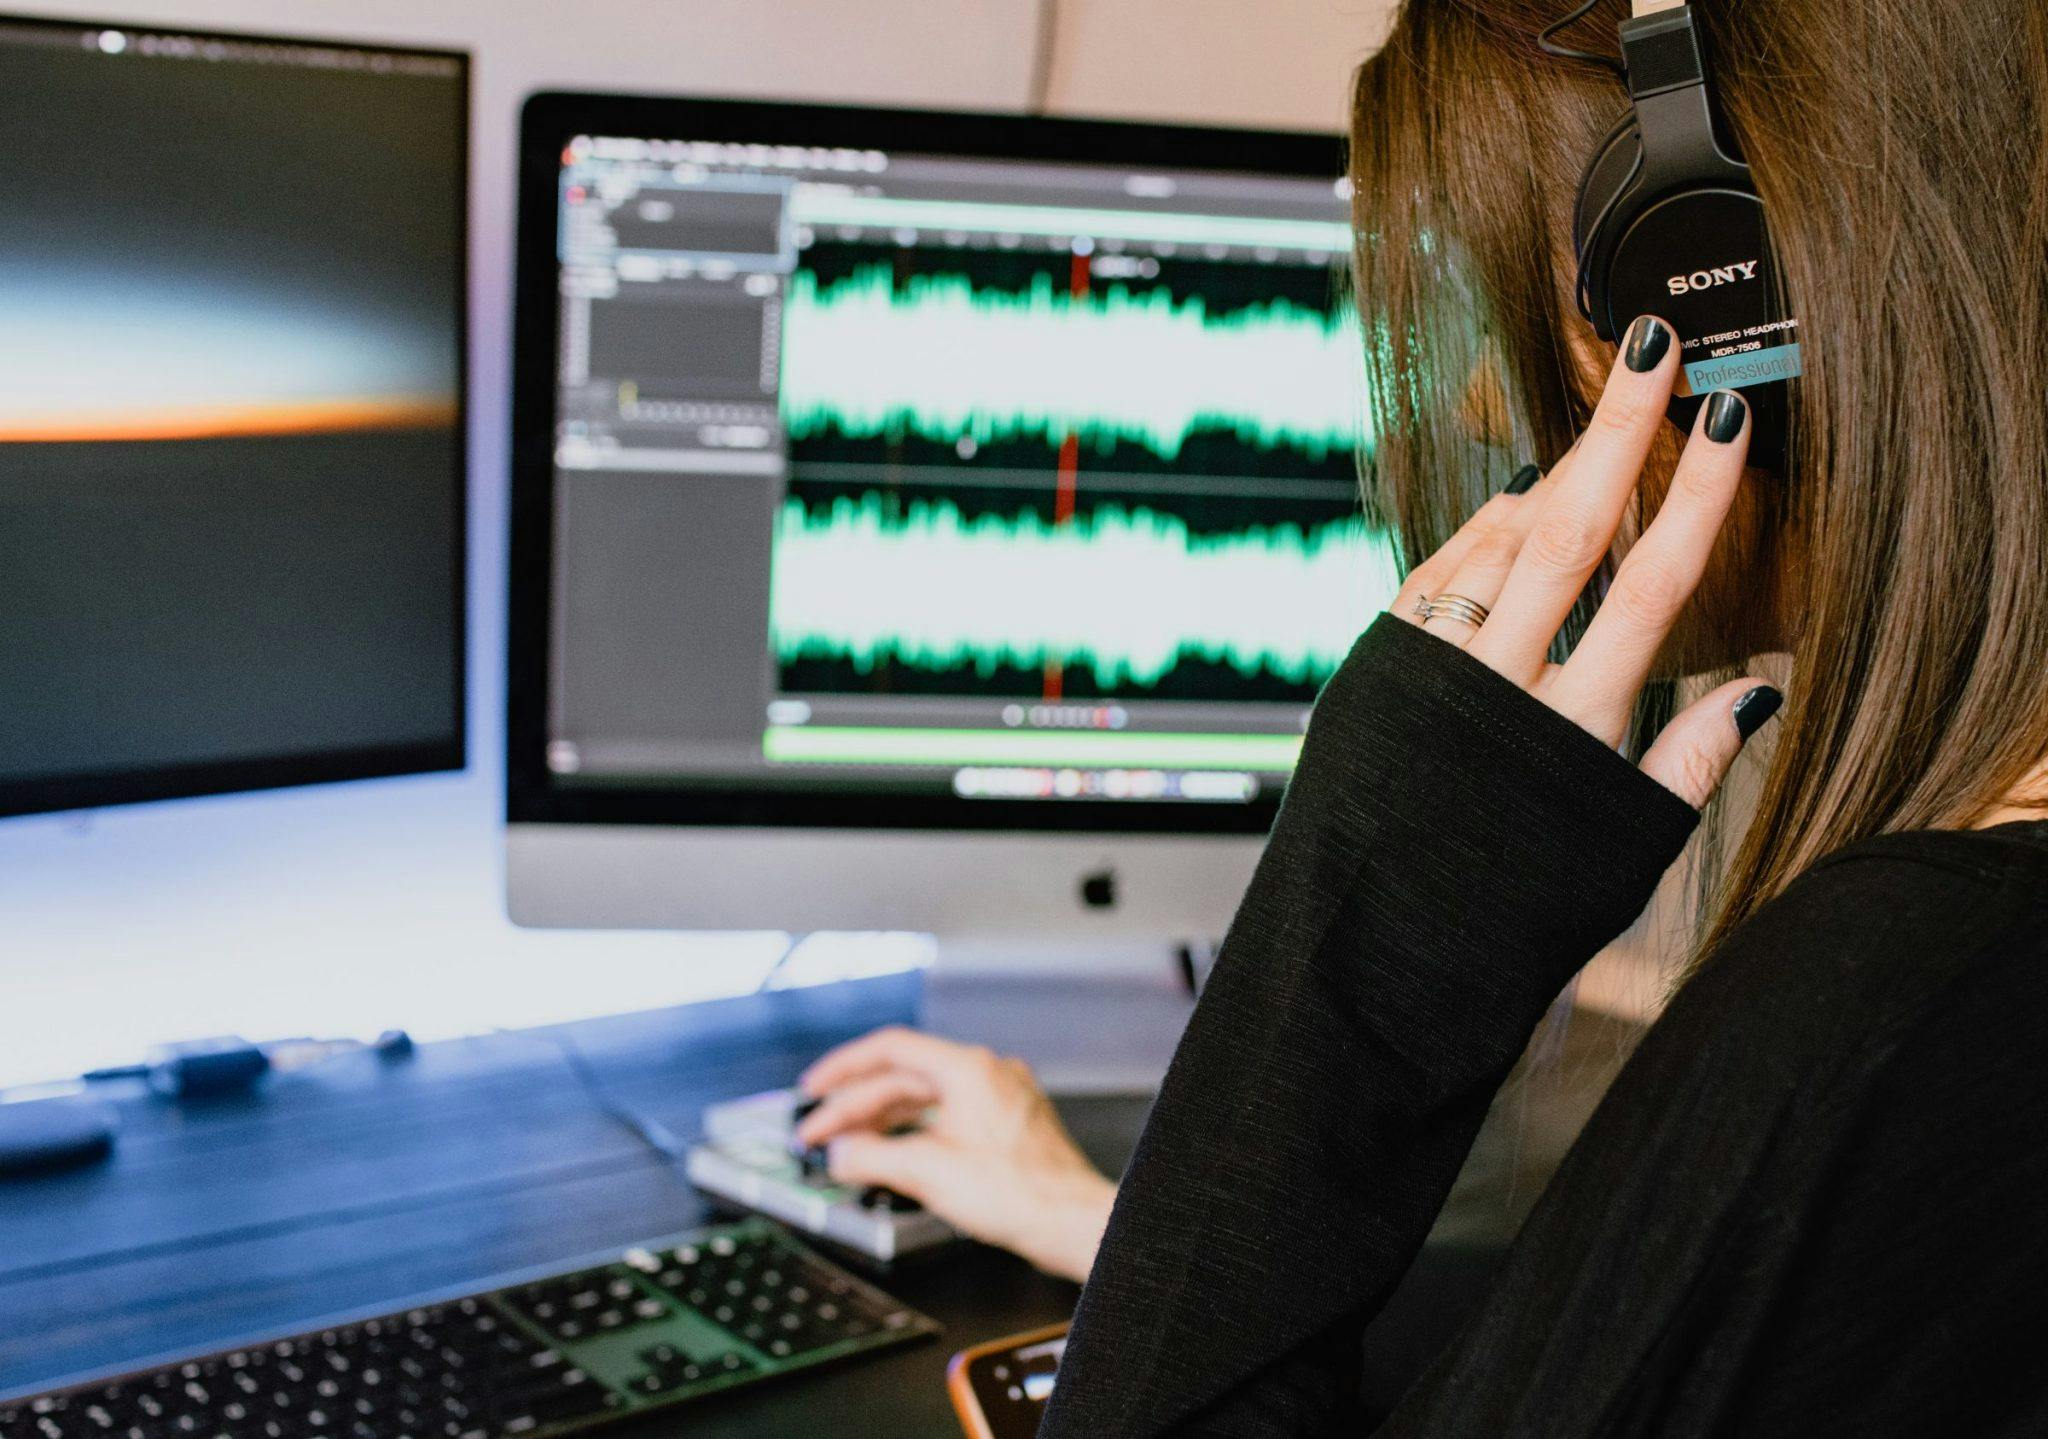 A woman wearing headphones editing her audio brand on computer screen